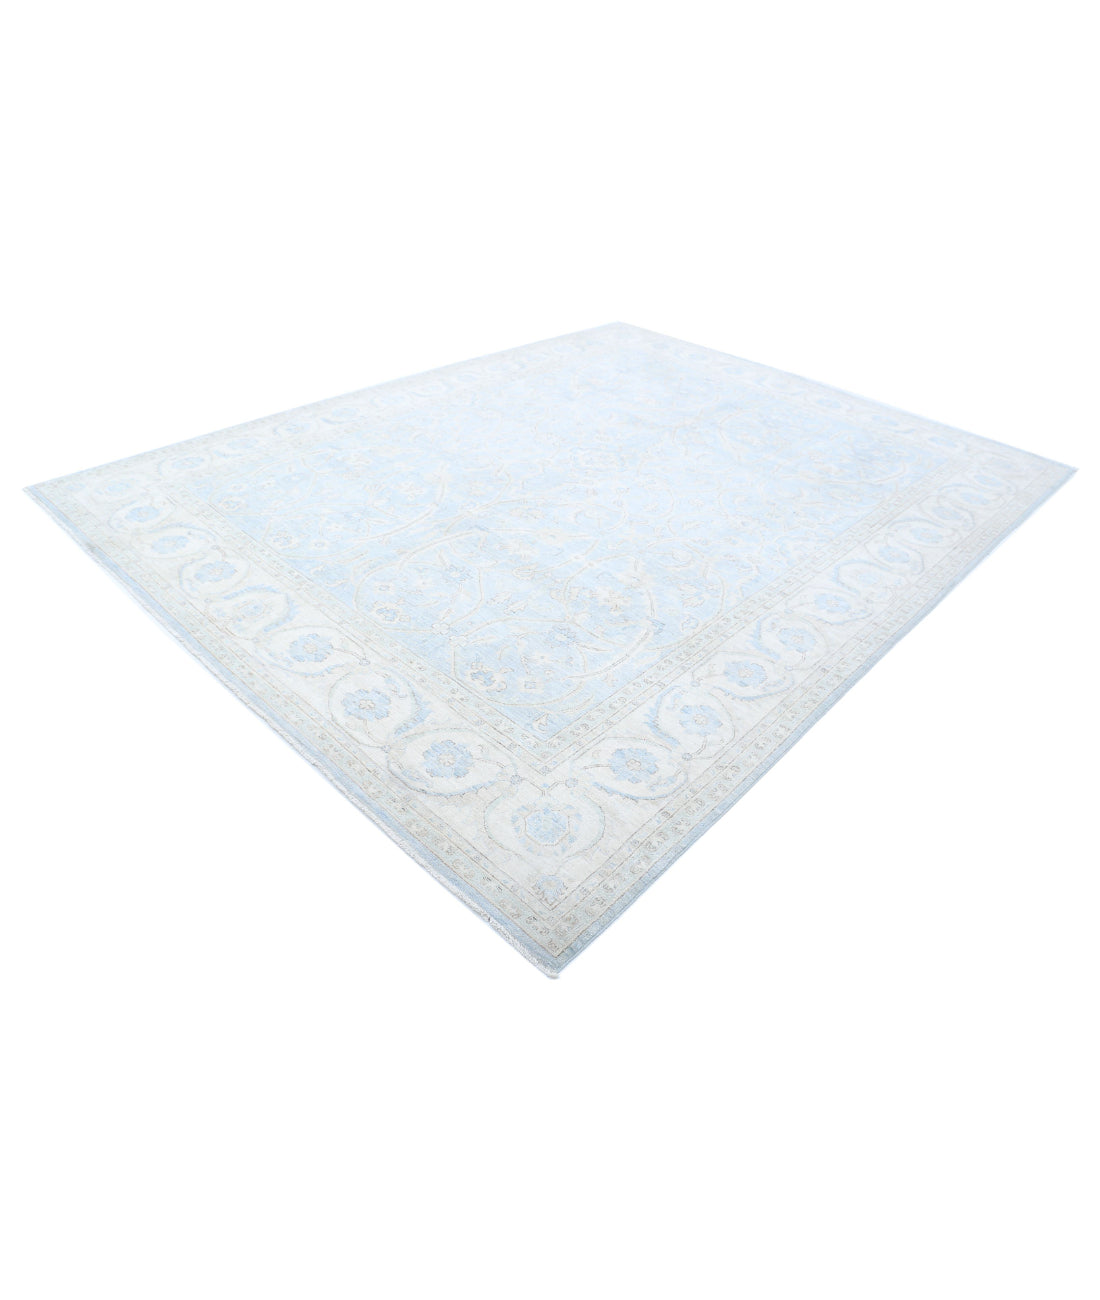 Serenity 8'9'' X 11'3'' Hand-Knotted Wool Rug 8'9'' x 11'3'' (263 X 338) / Grey / Ivory